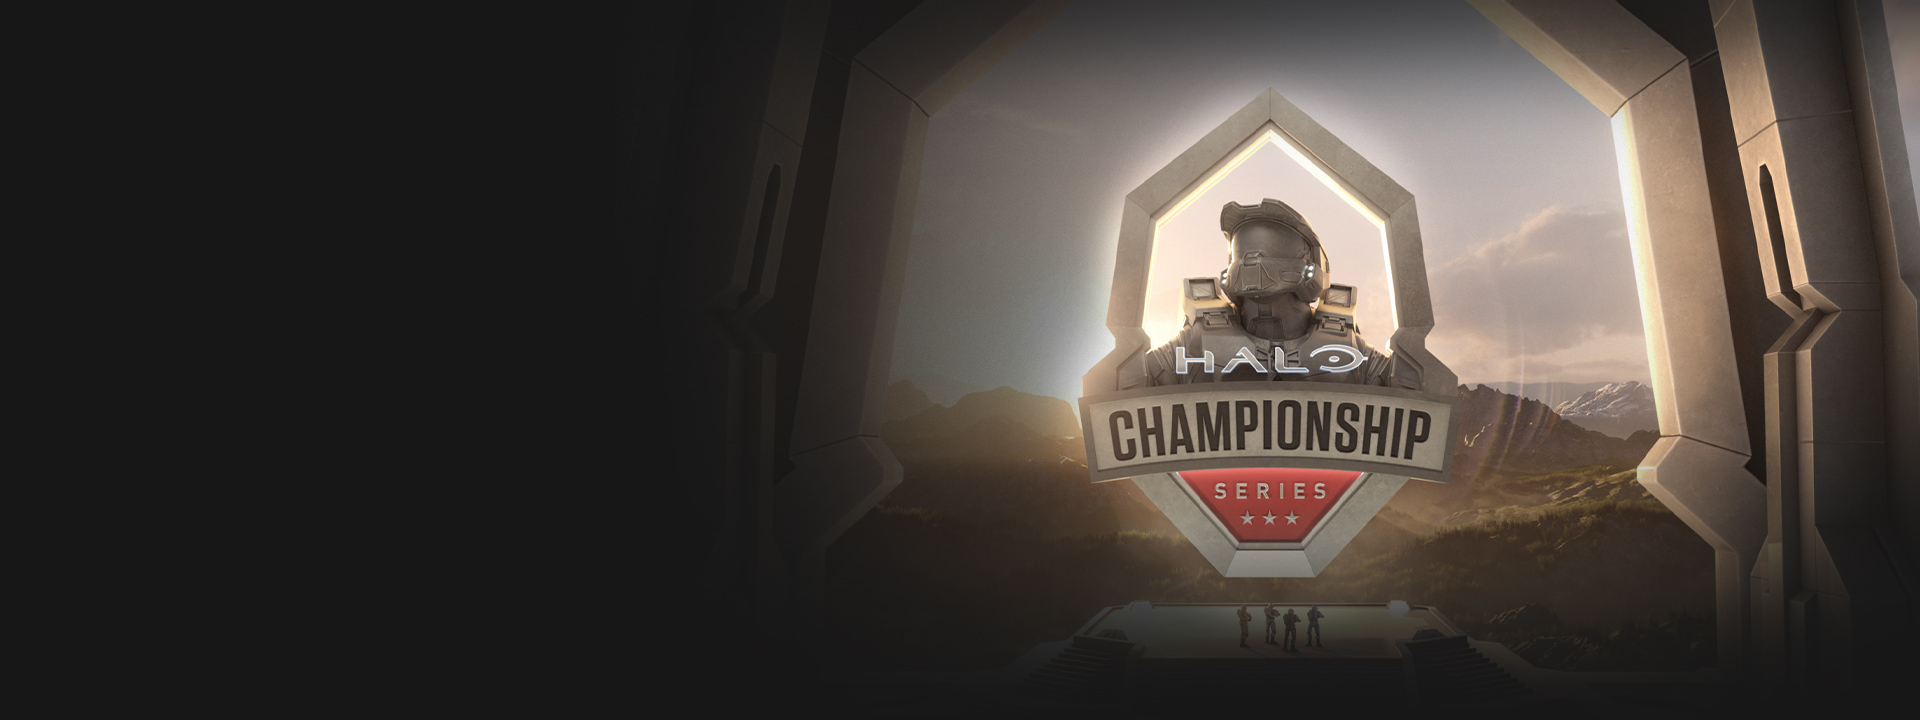 Halo Championship Series. A group of Spartans look out over a mountain vista, framing the Halo Championship Series logo.